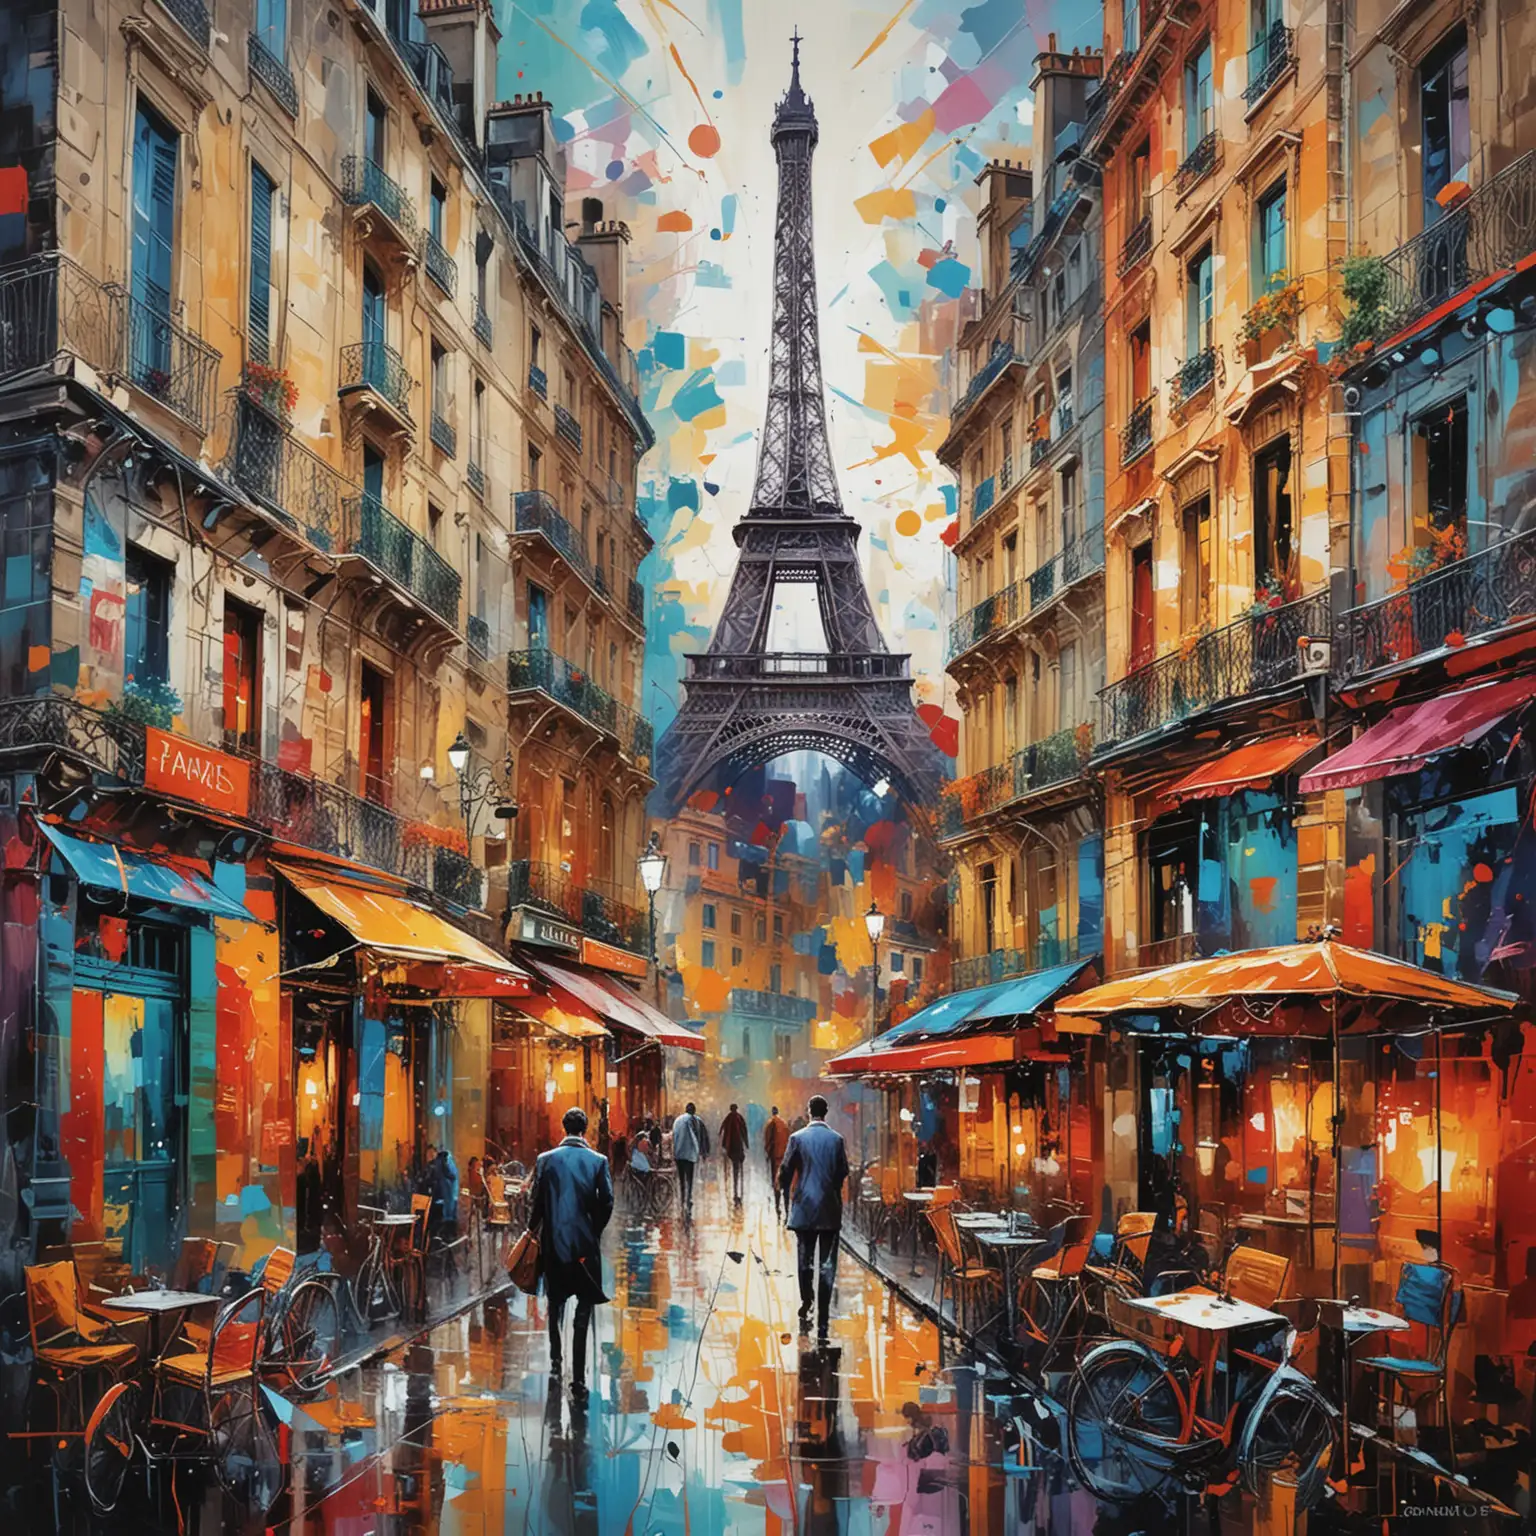 Paris depicted in the style of an abstract expressionist with vibrant colors and exaggerated facial expressions. The background is a chaotic mix of patterns and shapes that complement the overall surreal atmosphere